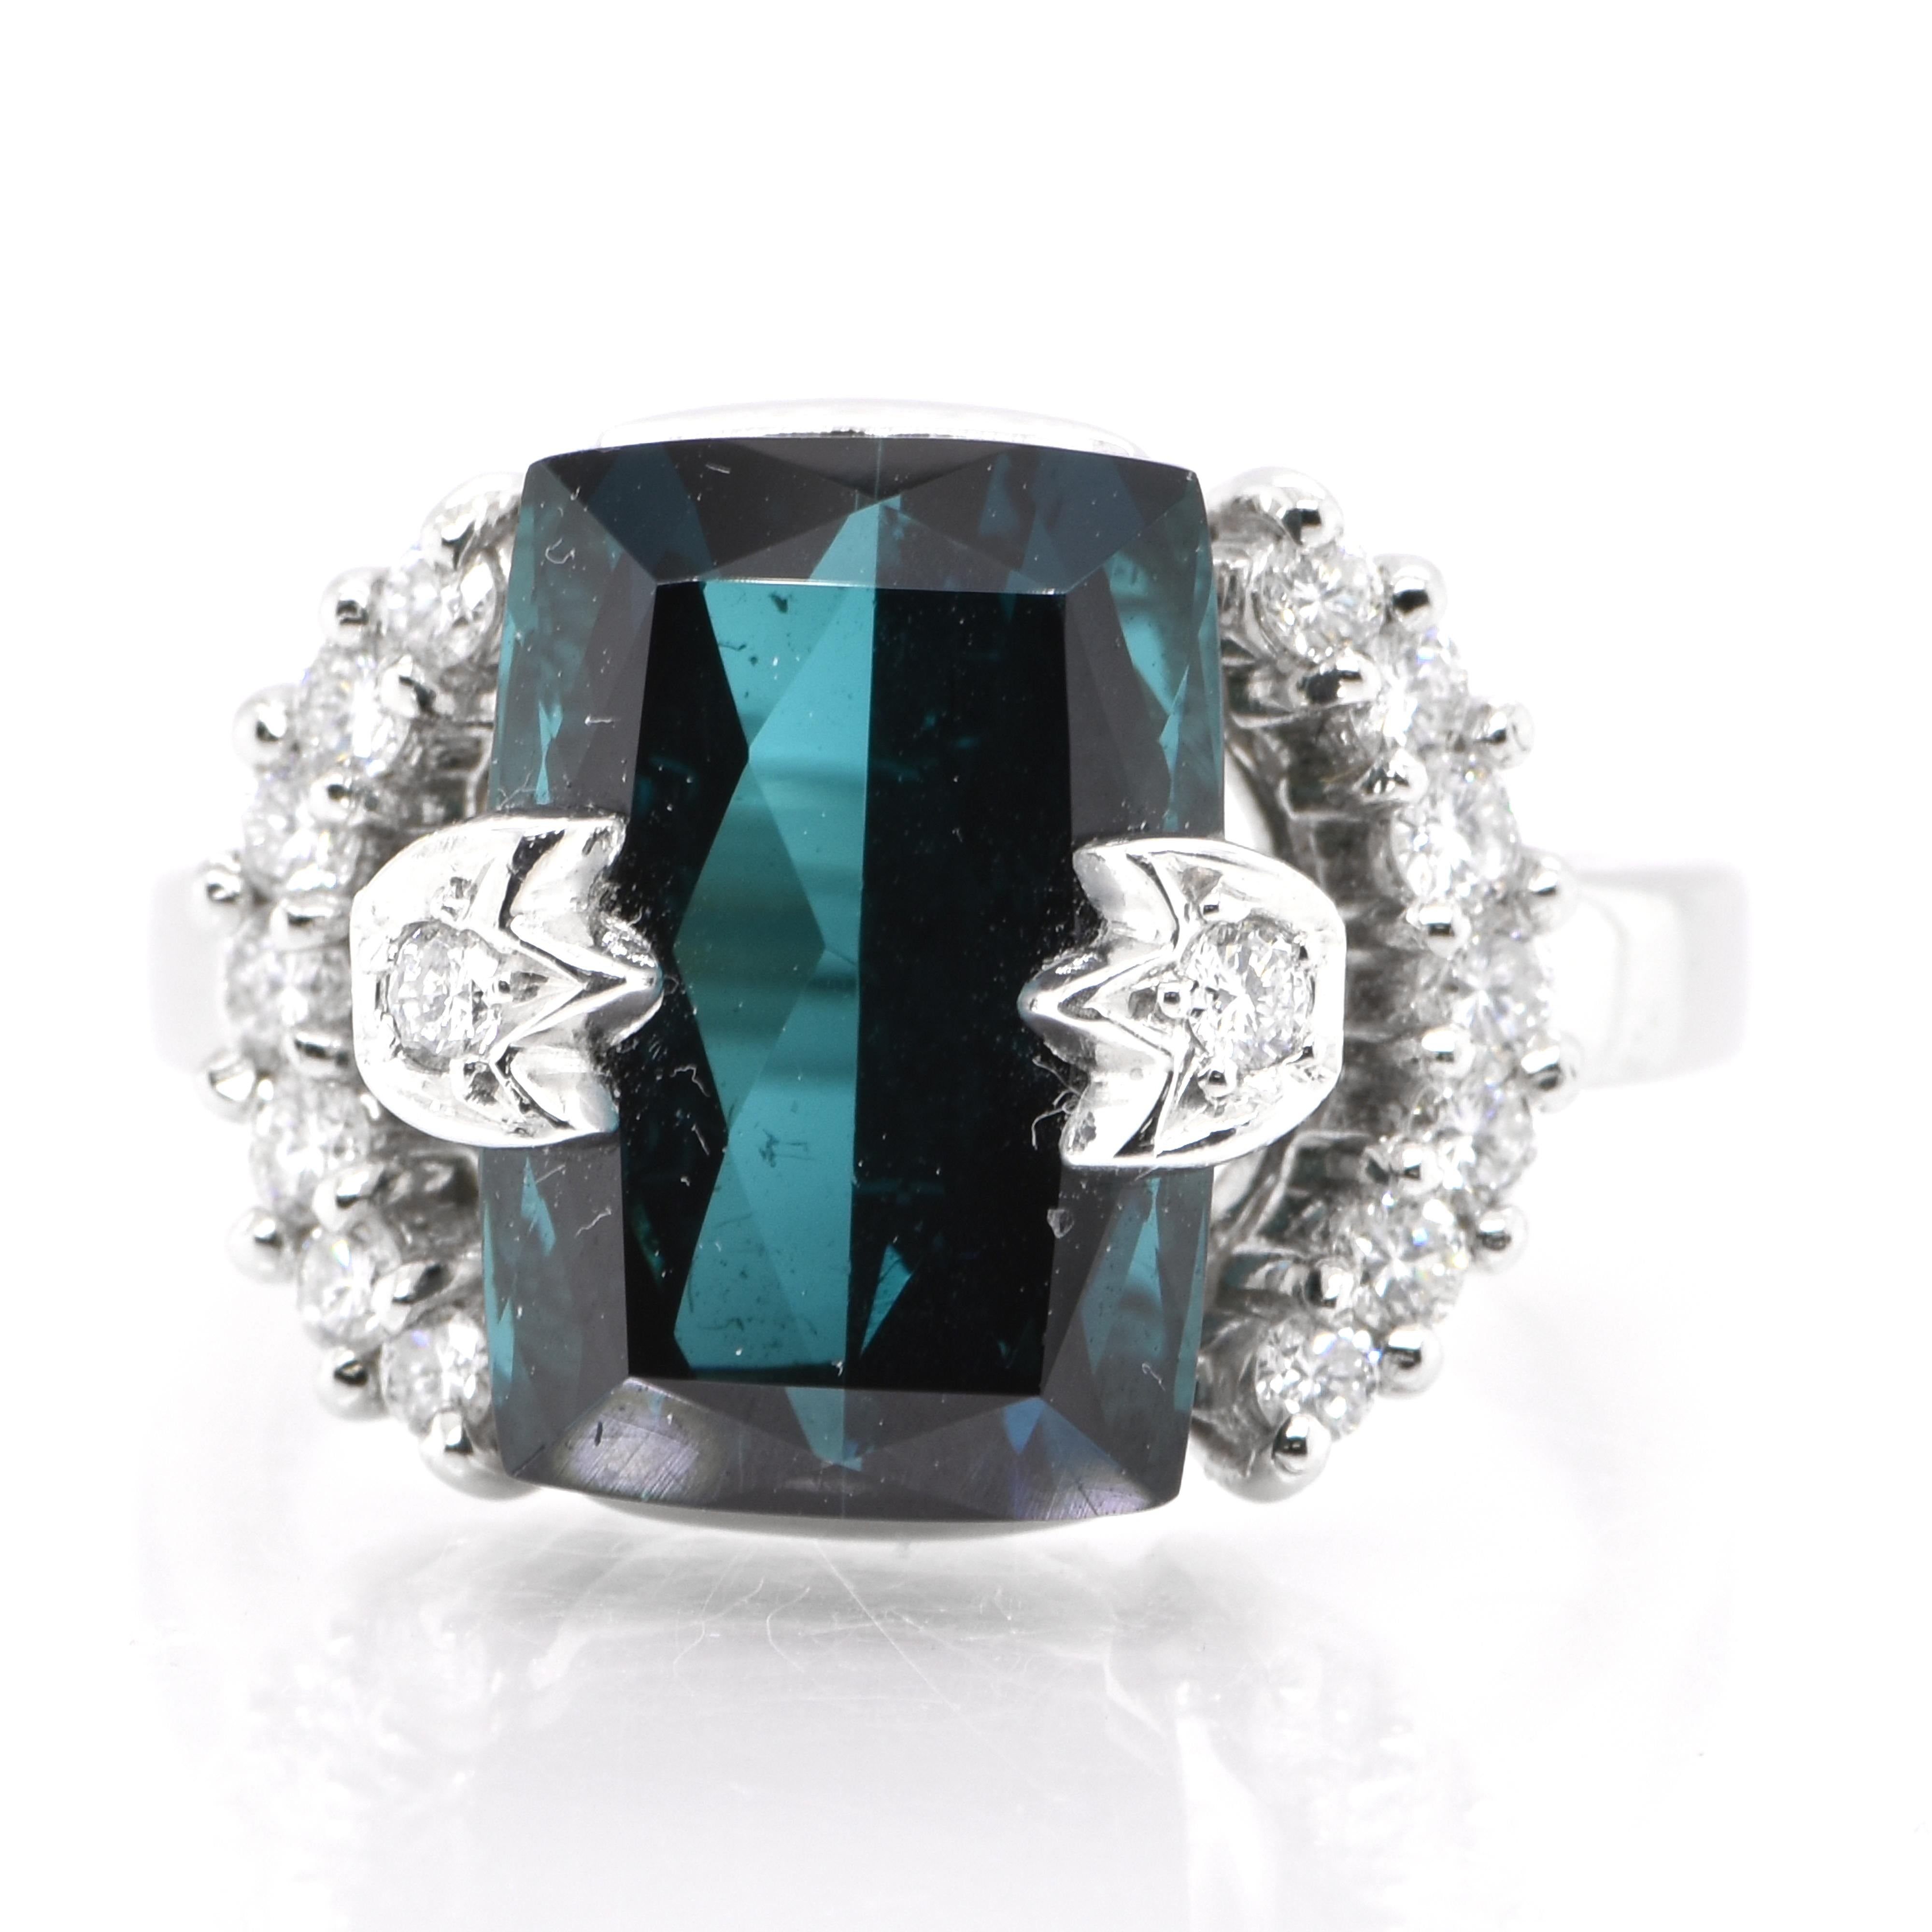 A stunning Cocktail Ring featuring a 7.07 Carat, Natural Blue Tourmaline and 0.46 Carats of Diamond Accents set in Platinum. Tourmalines were first discovered by Spanish conquistadors in Brazil in 1500s. The name Tourmaline comes from Sinhalese